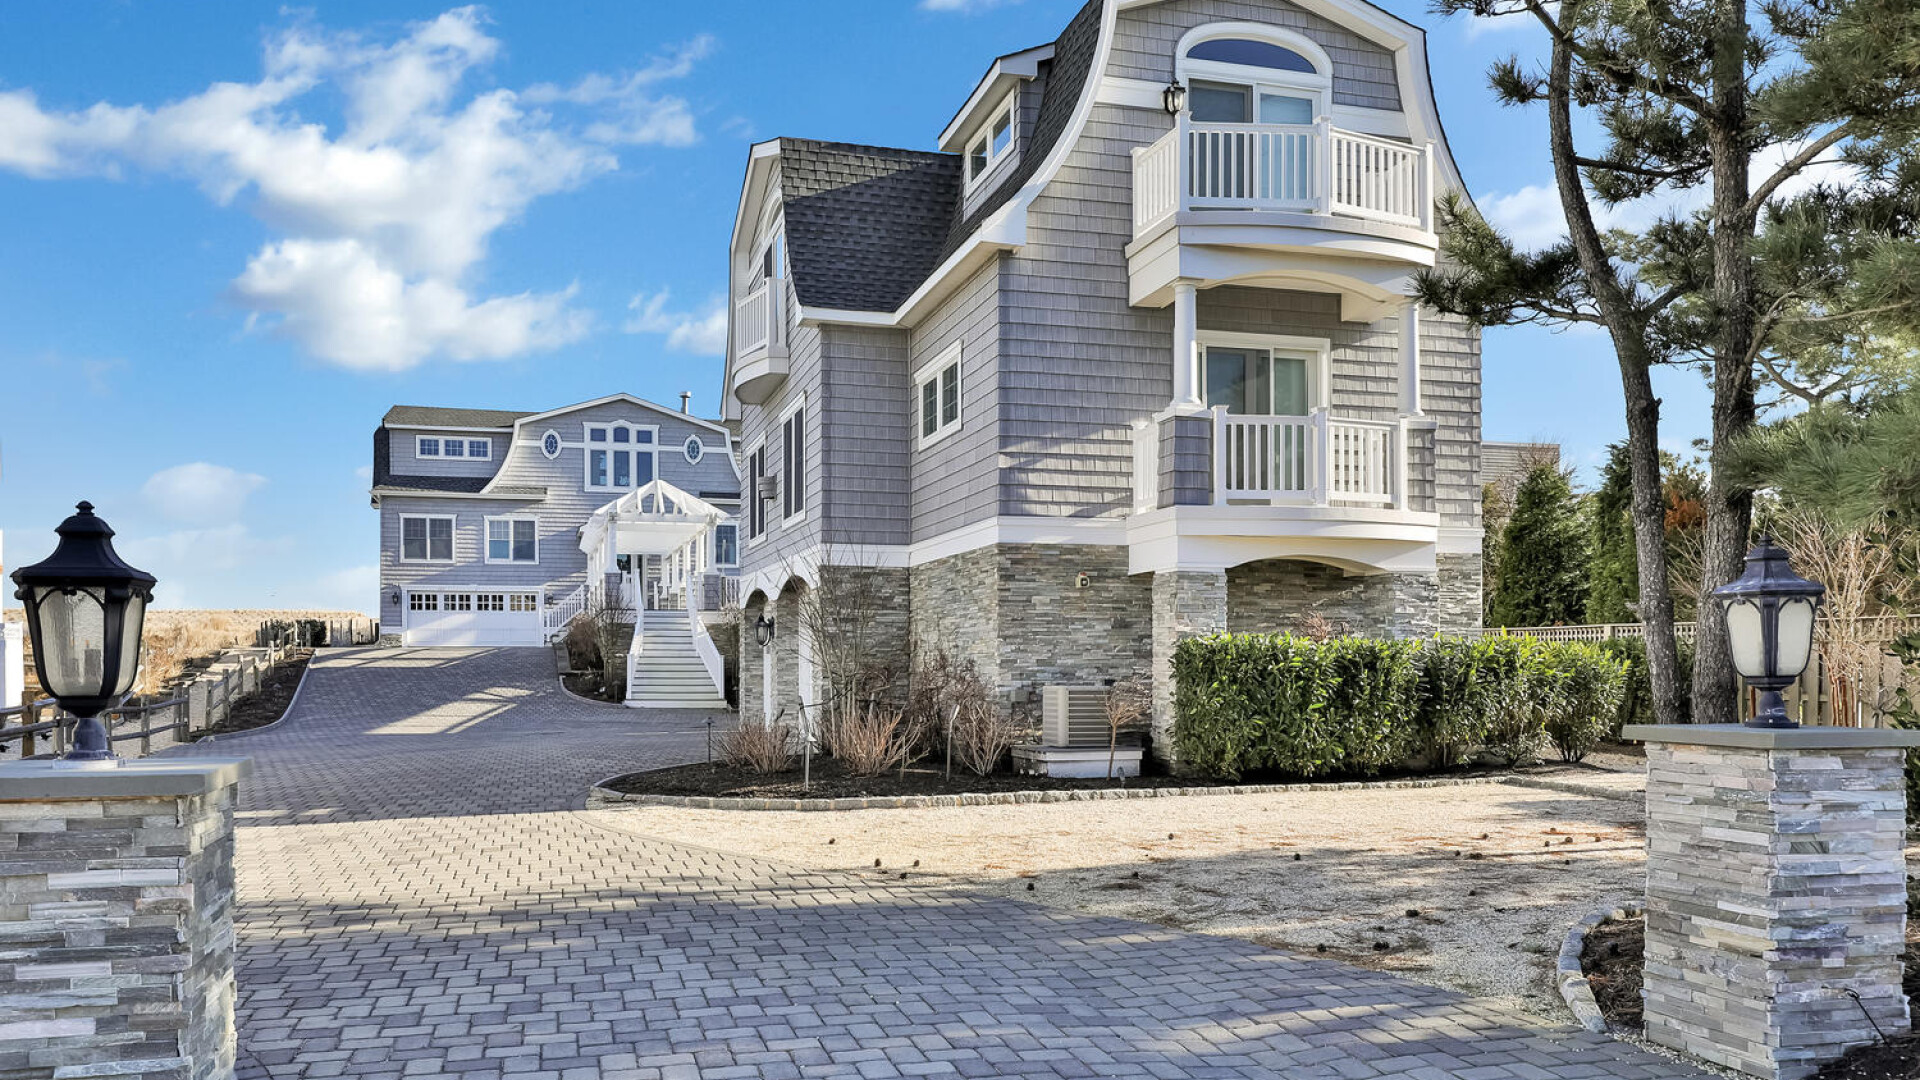 Waterside home with a sophisticated stone exterior and private balconies, Long Beach Island NJ